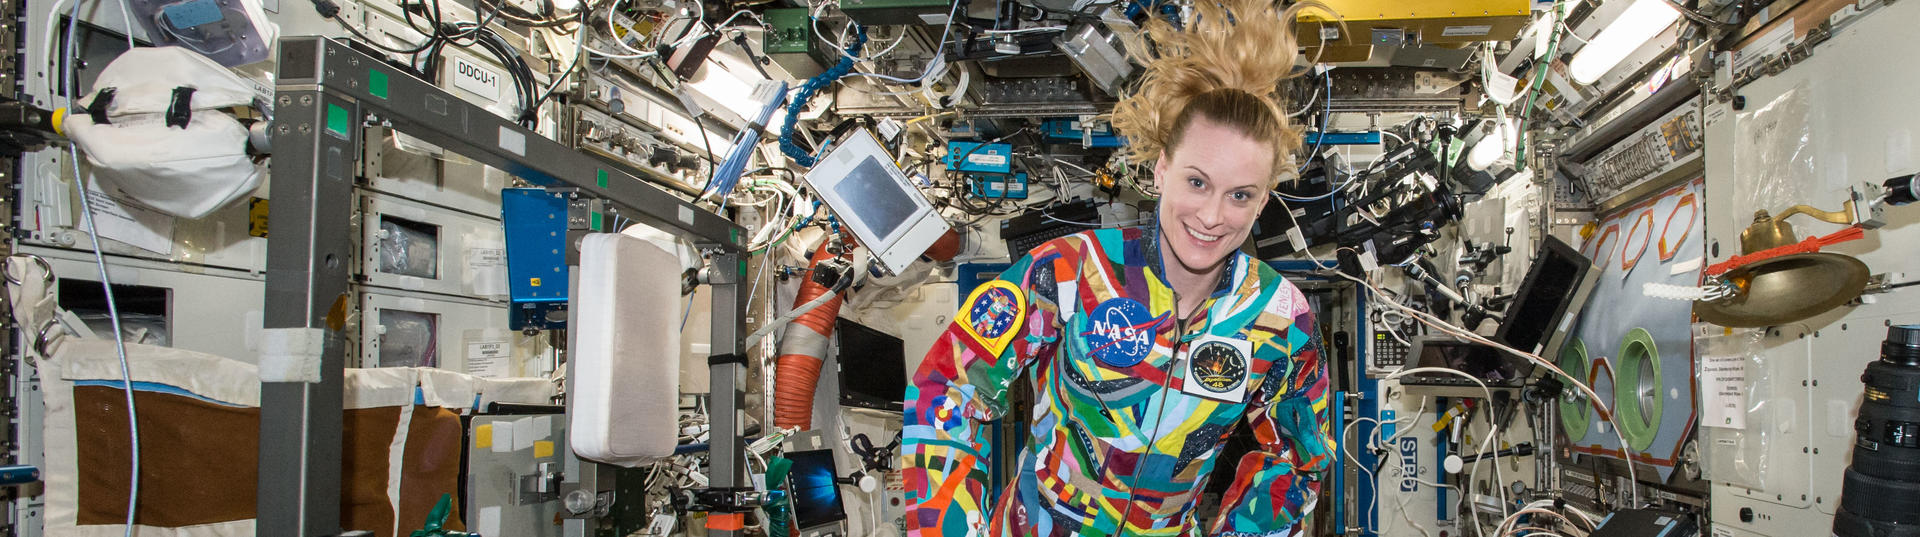 Kate Rubins, astronaut, in Space Station